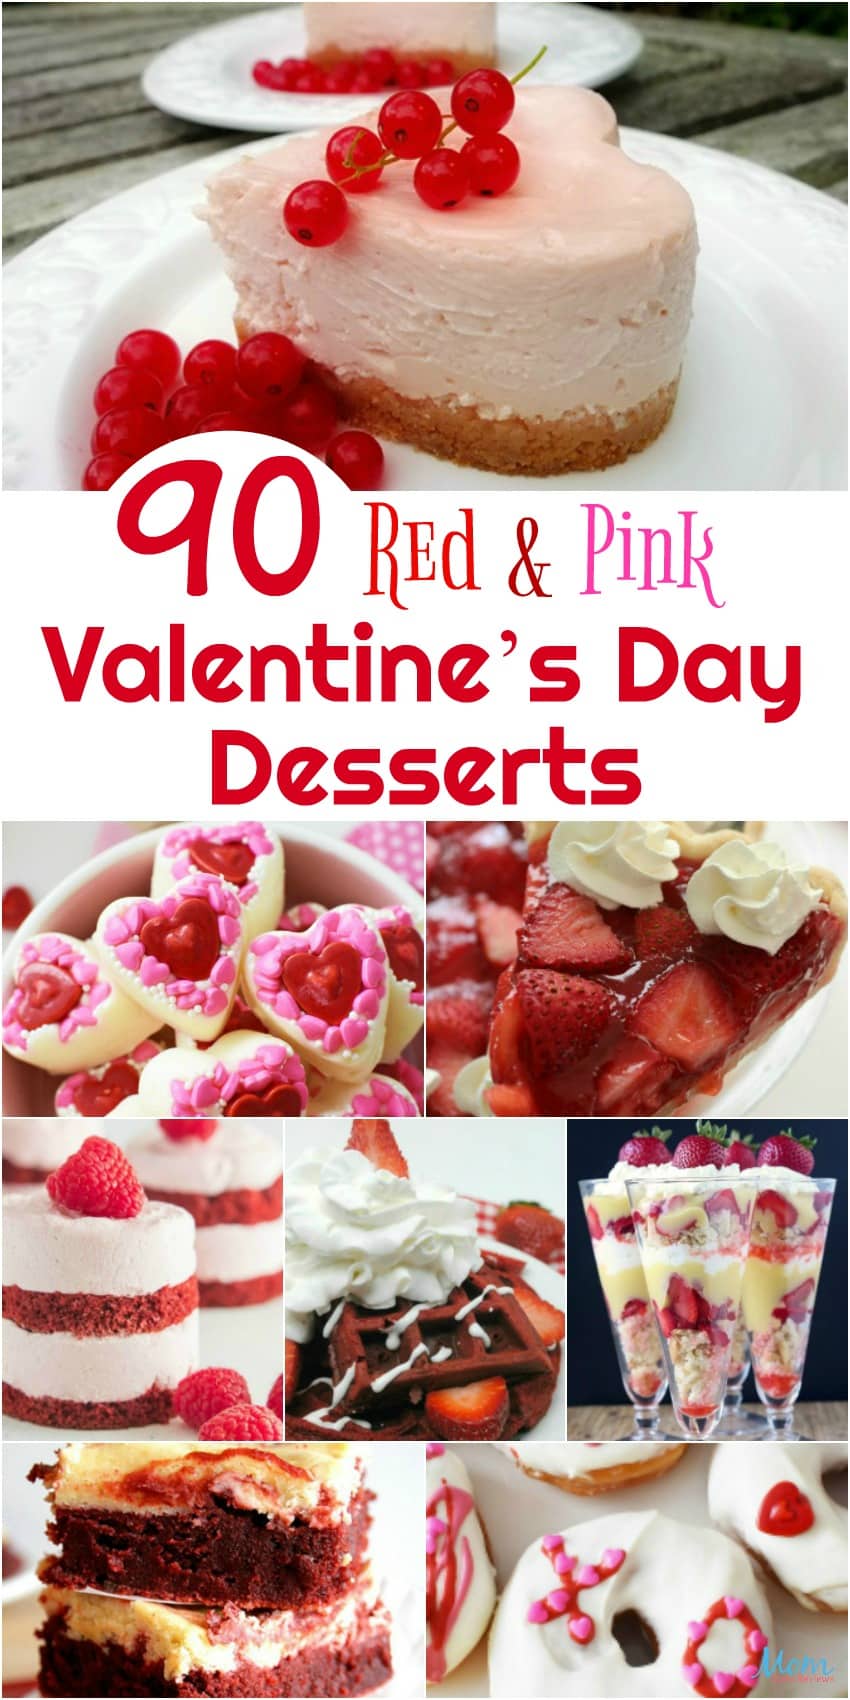 90 Red & Pink Valentine’s Day Desserts to WOW Your Sweetheart! #Sweet2019 #desserts #valentinesday #yummy #cupcakes #cakes #redvelvet 